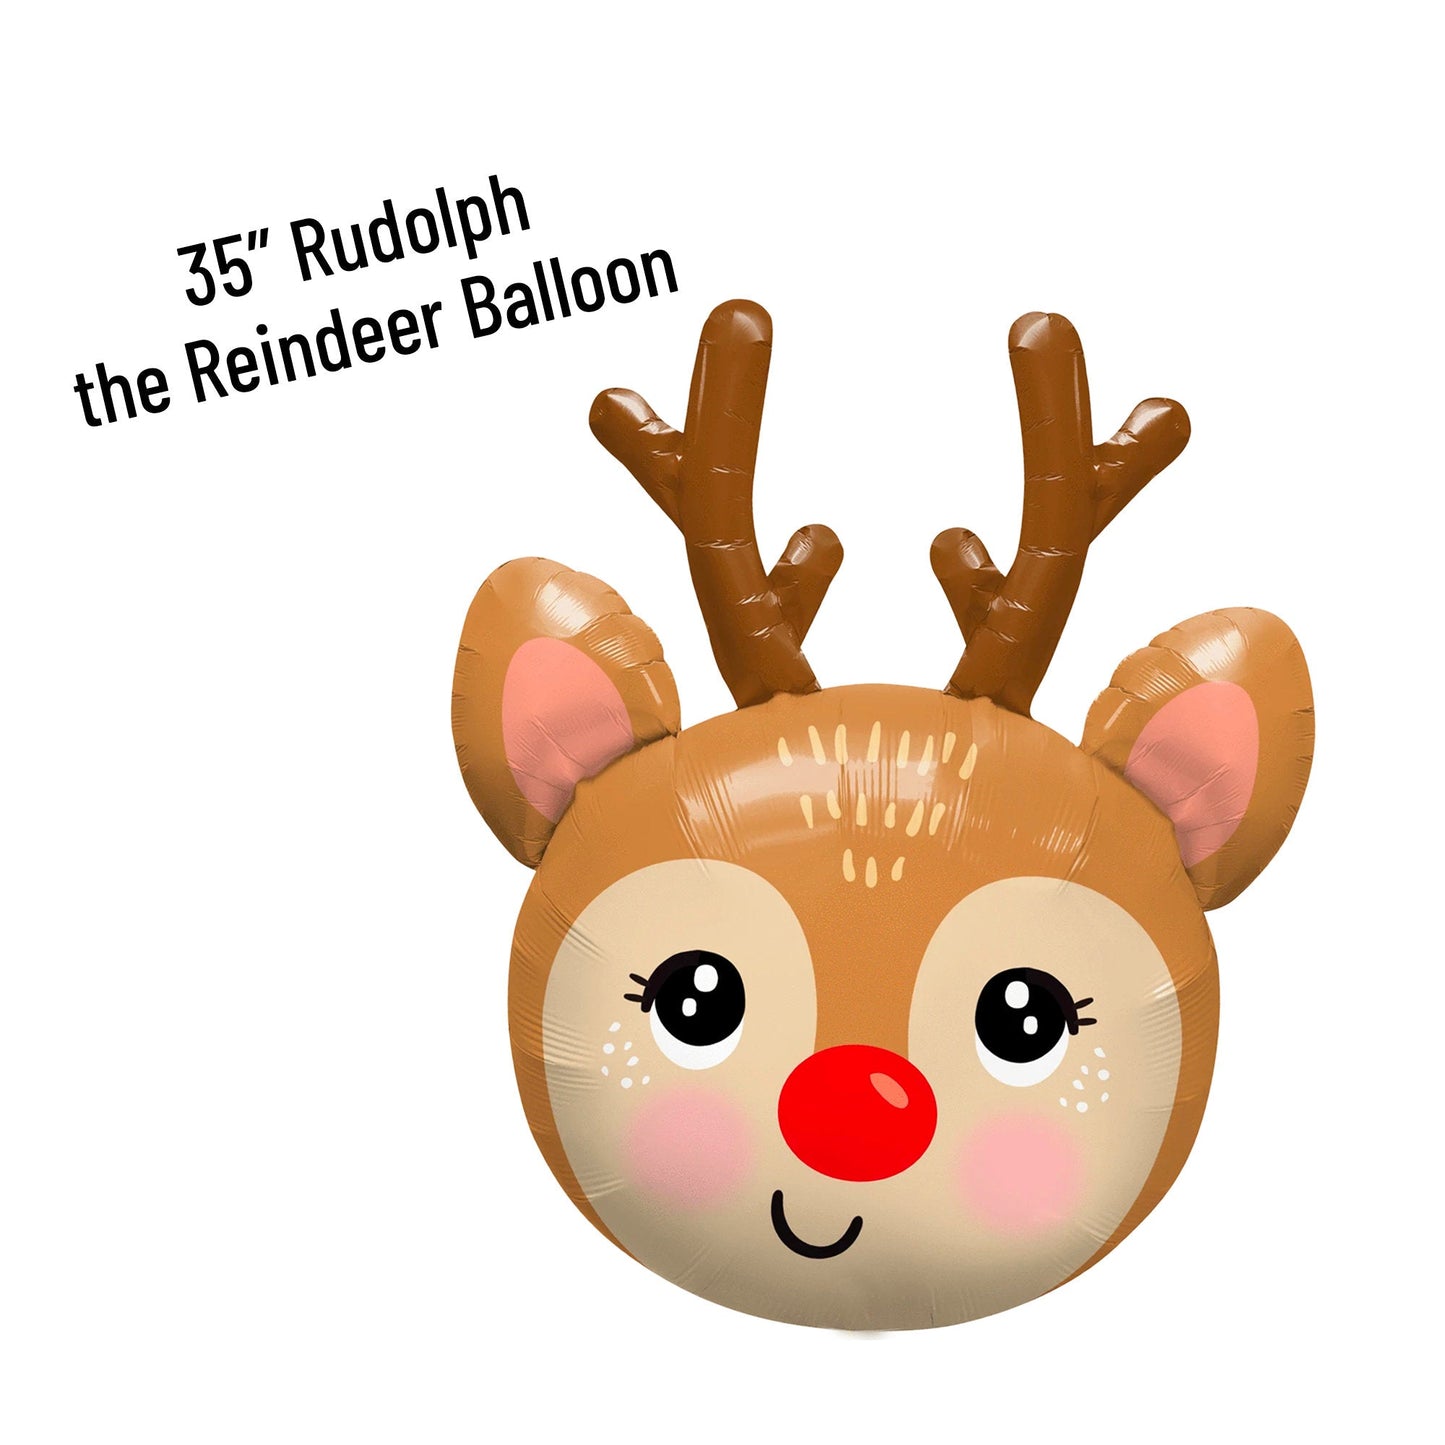 Giant Rudolph the Red Nosed Reindeer Christmas Balloon (35-Inches) - Ellie's Party Supply